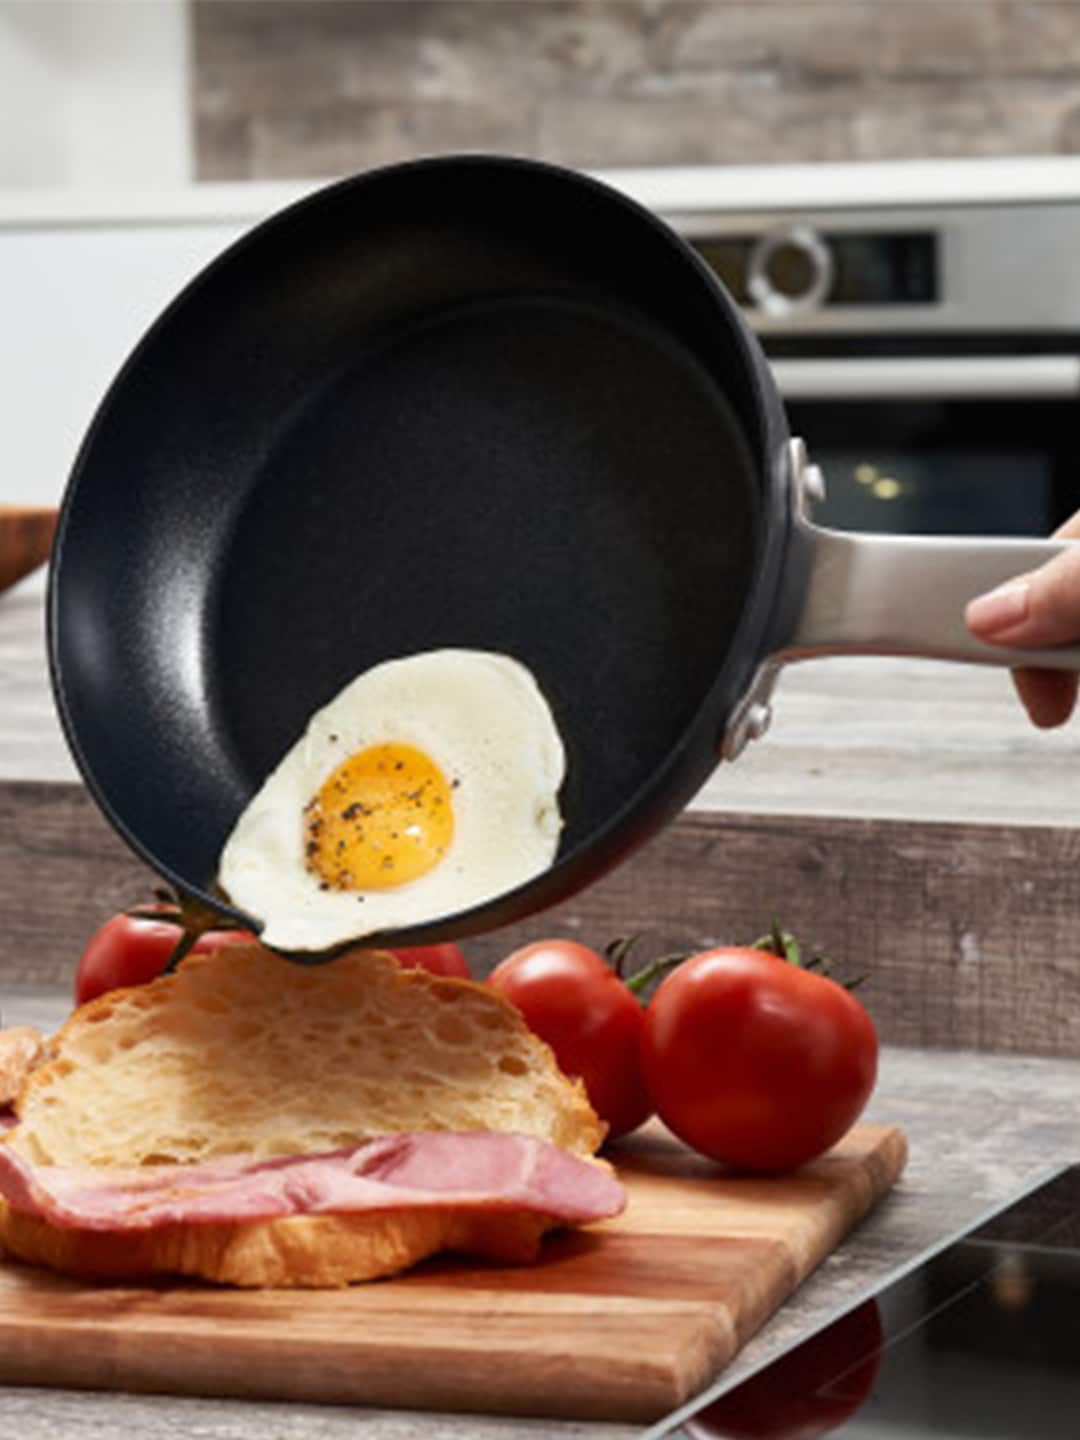 Zyliss Black Solid Dishwasher Safe Frying Pan Price in India